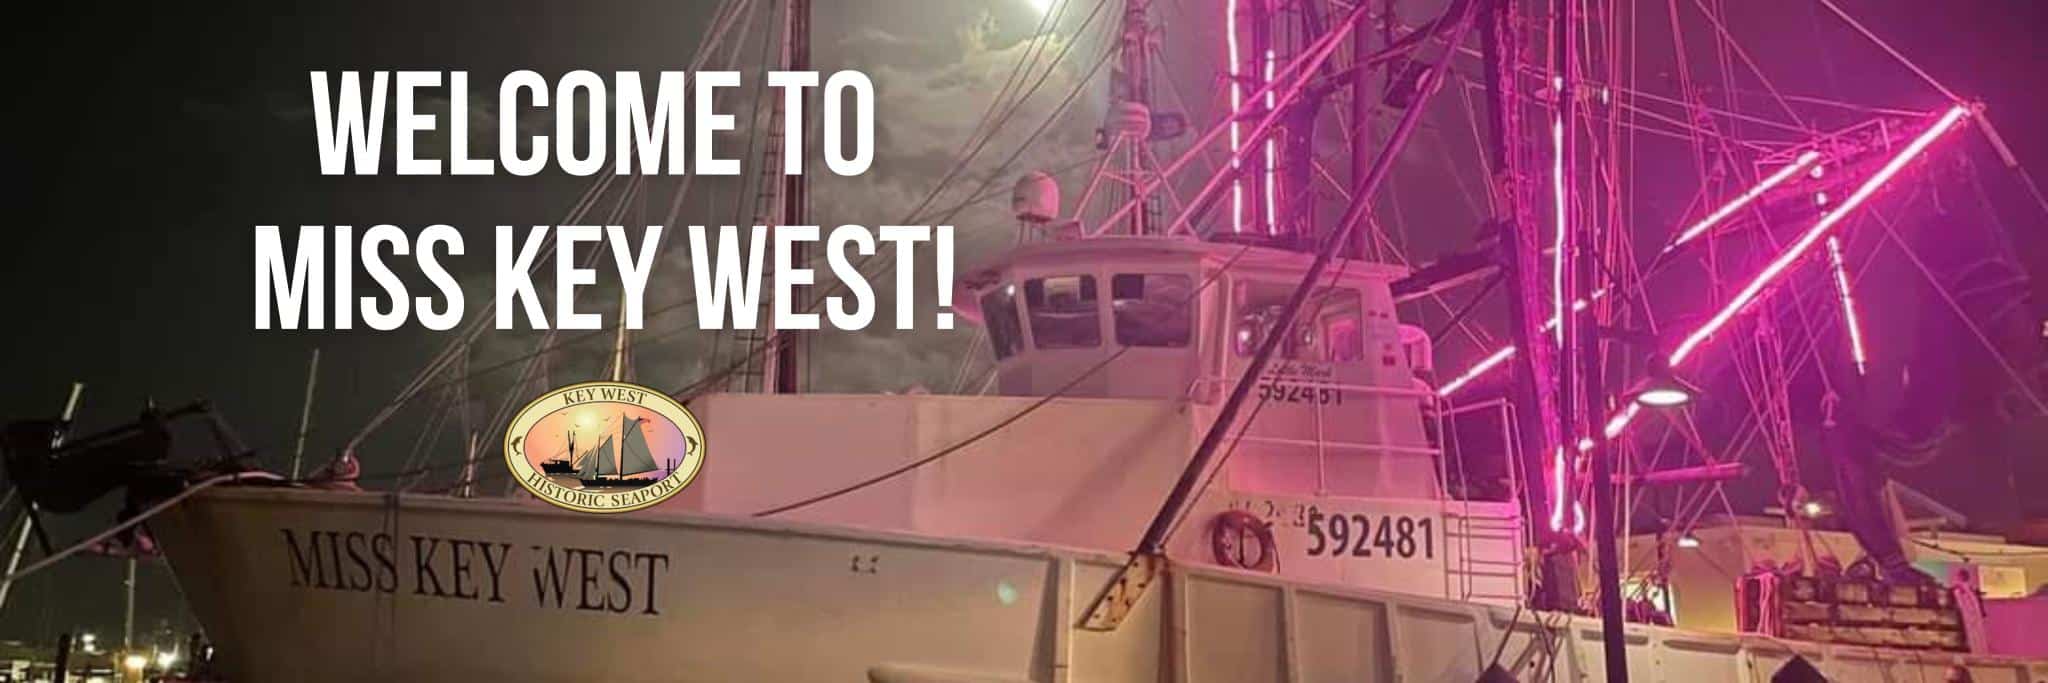 miss key west shrimp boat lit up in purple at night.